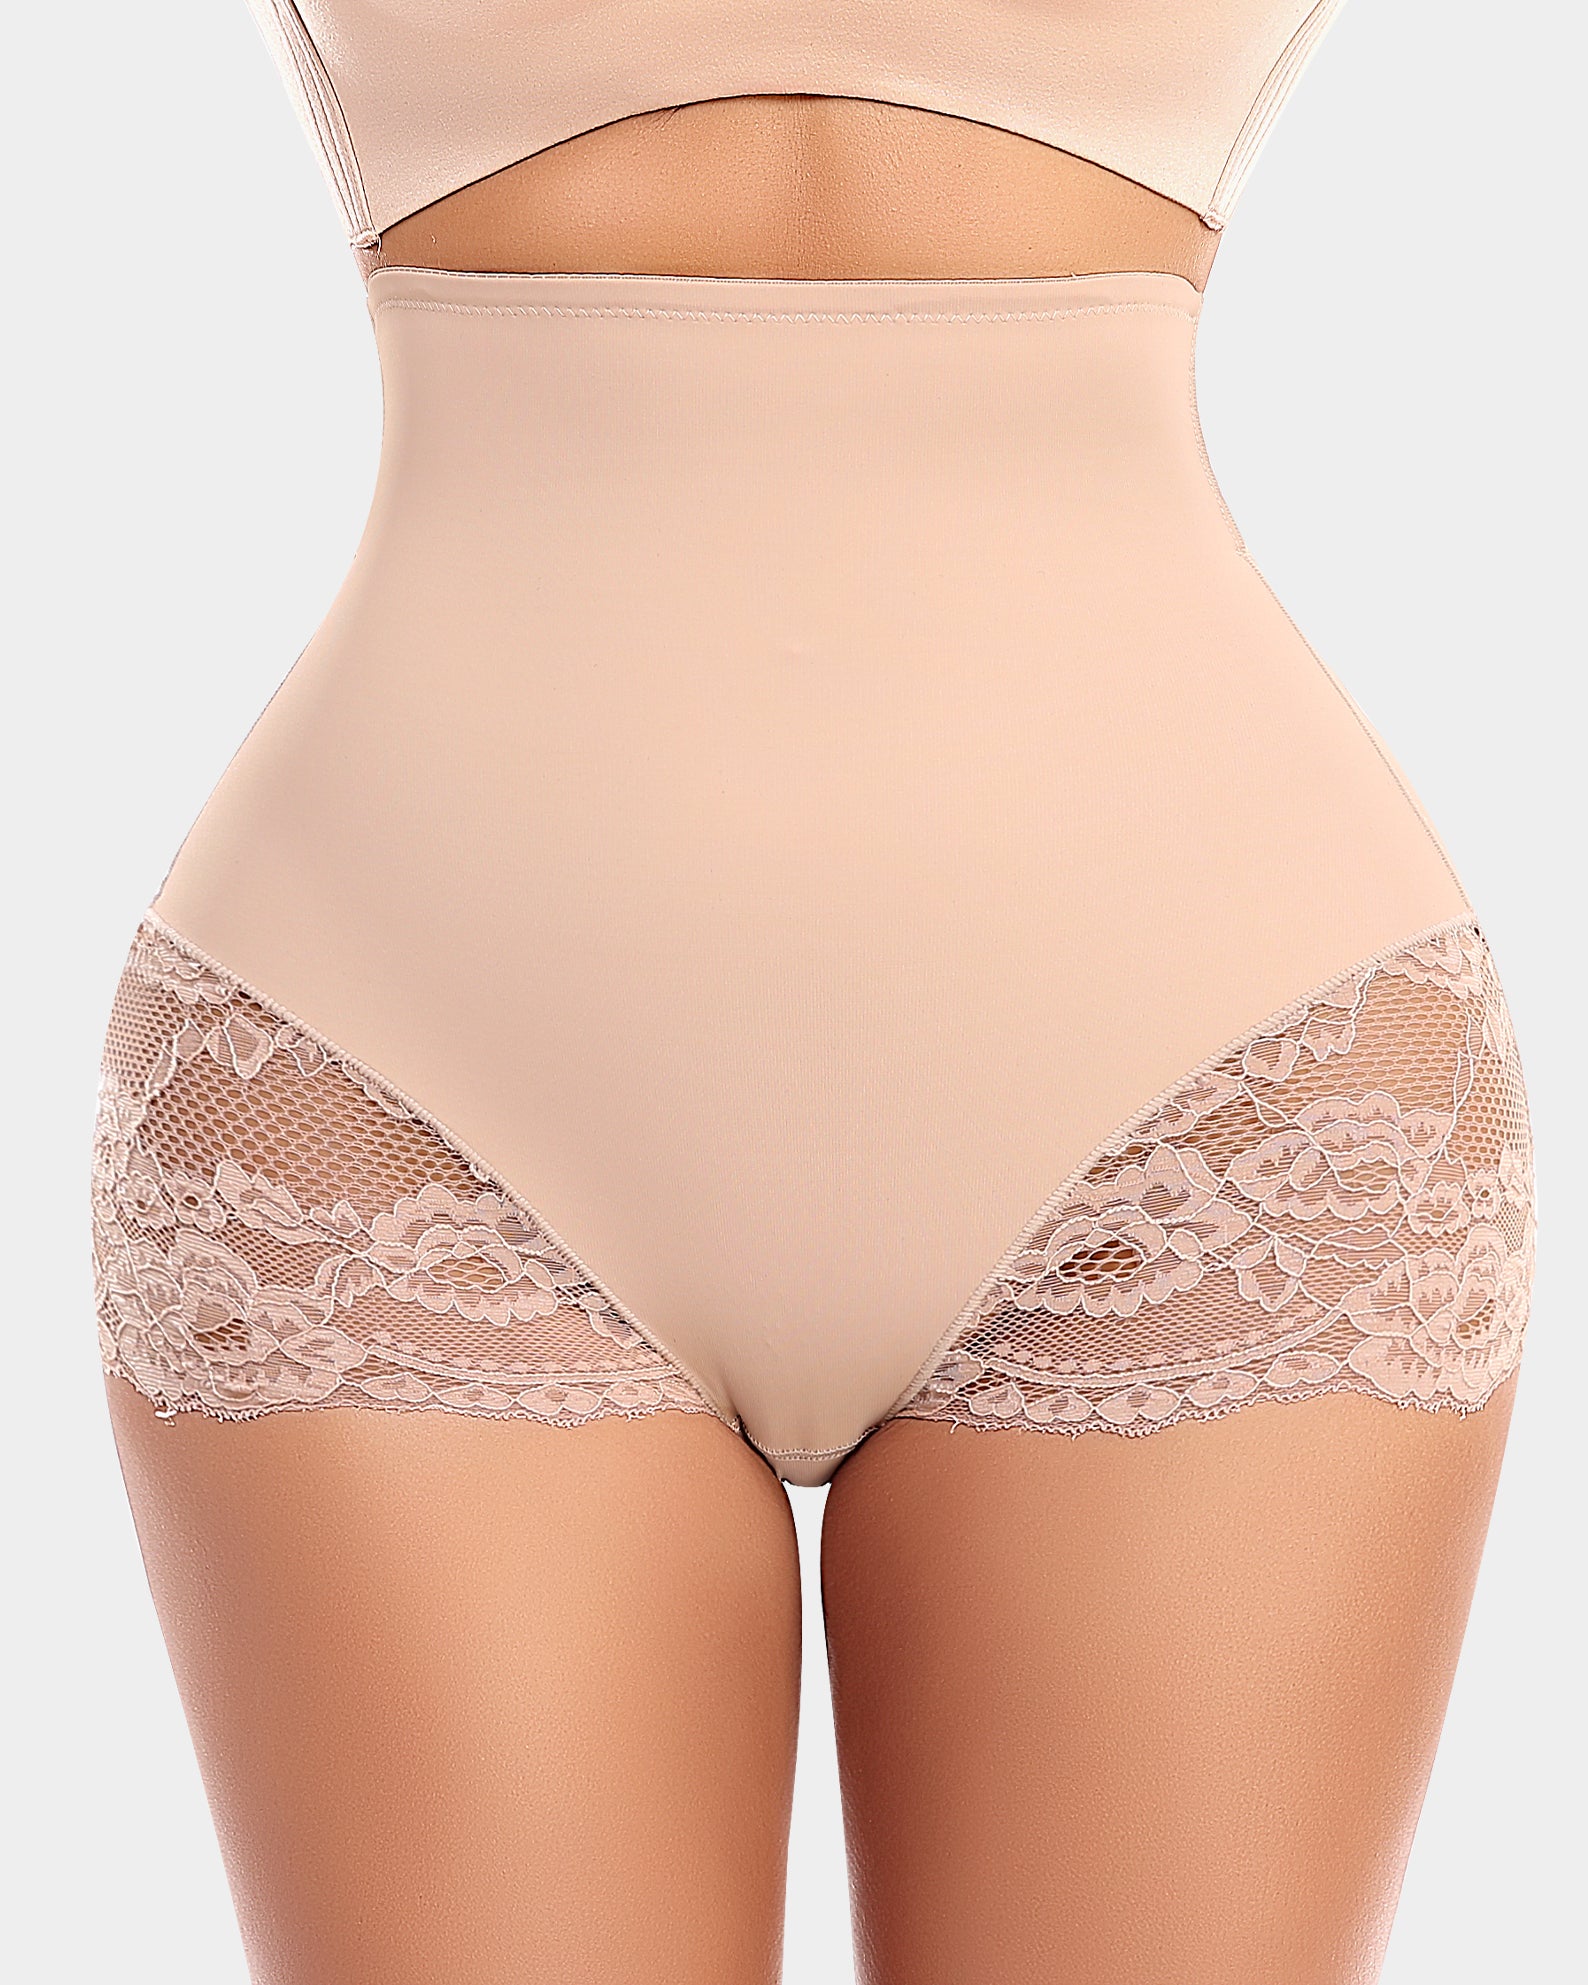 Tame Your Tummy Lace Brief Shaper Panty